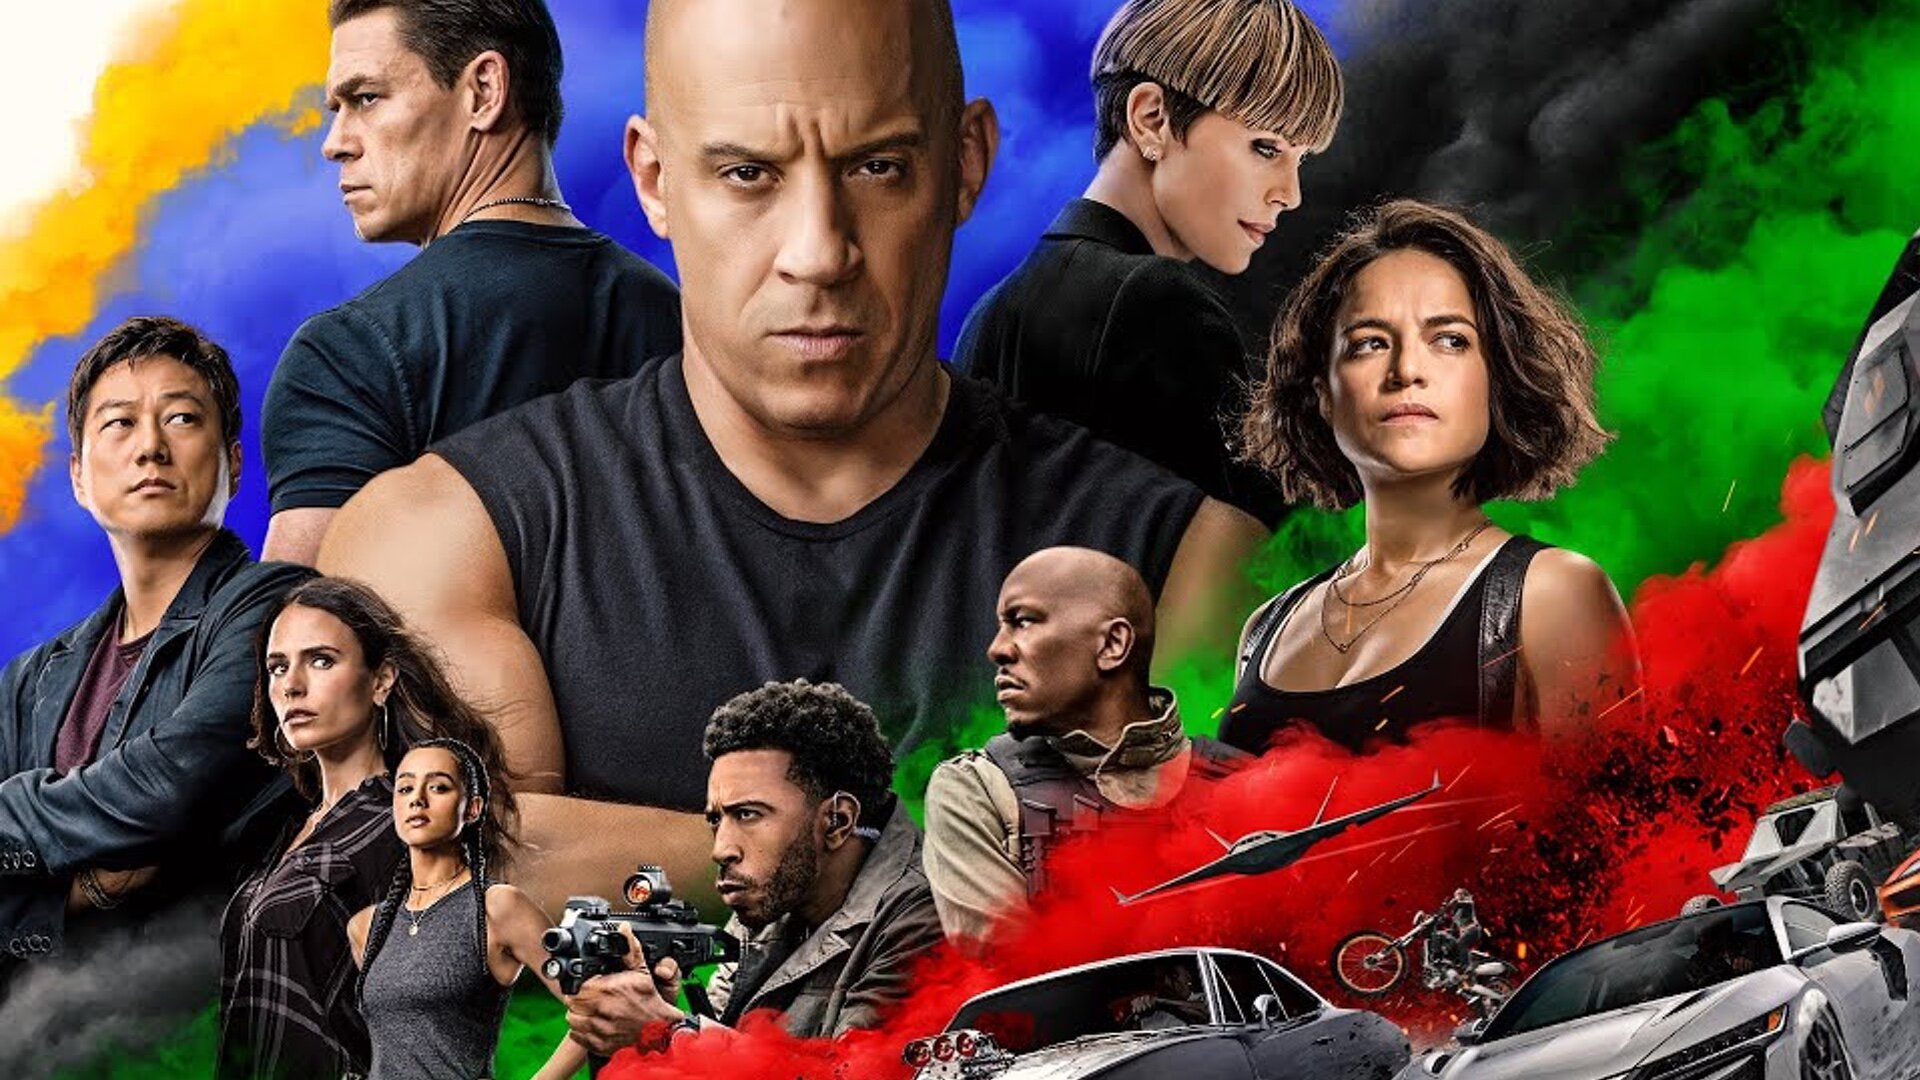 Cover Image Vin DIesel Michelle Rodriguez Ludacris Tyrese Gibson Jordana Brewster John Cena Charlize Theron F9 Fast and Furious Universal Pictures